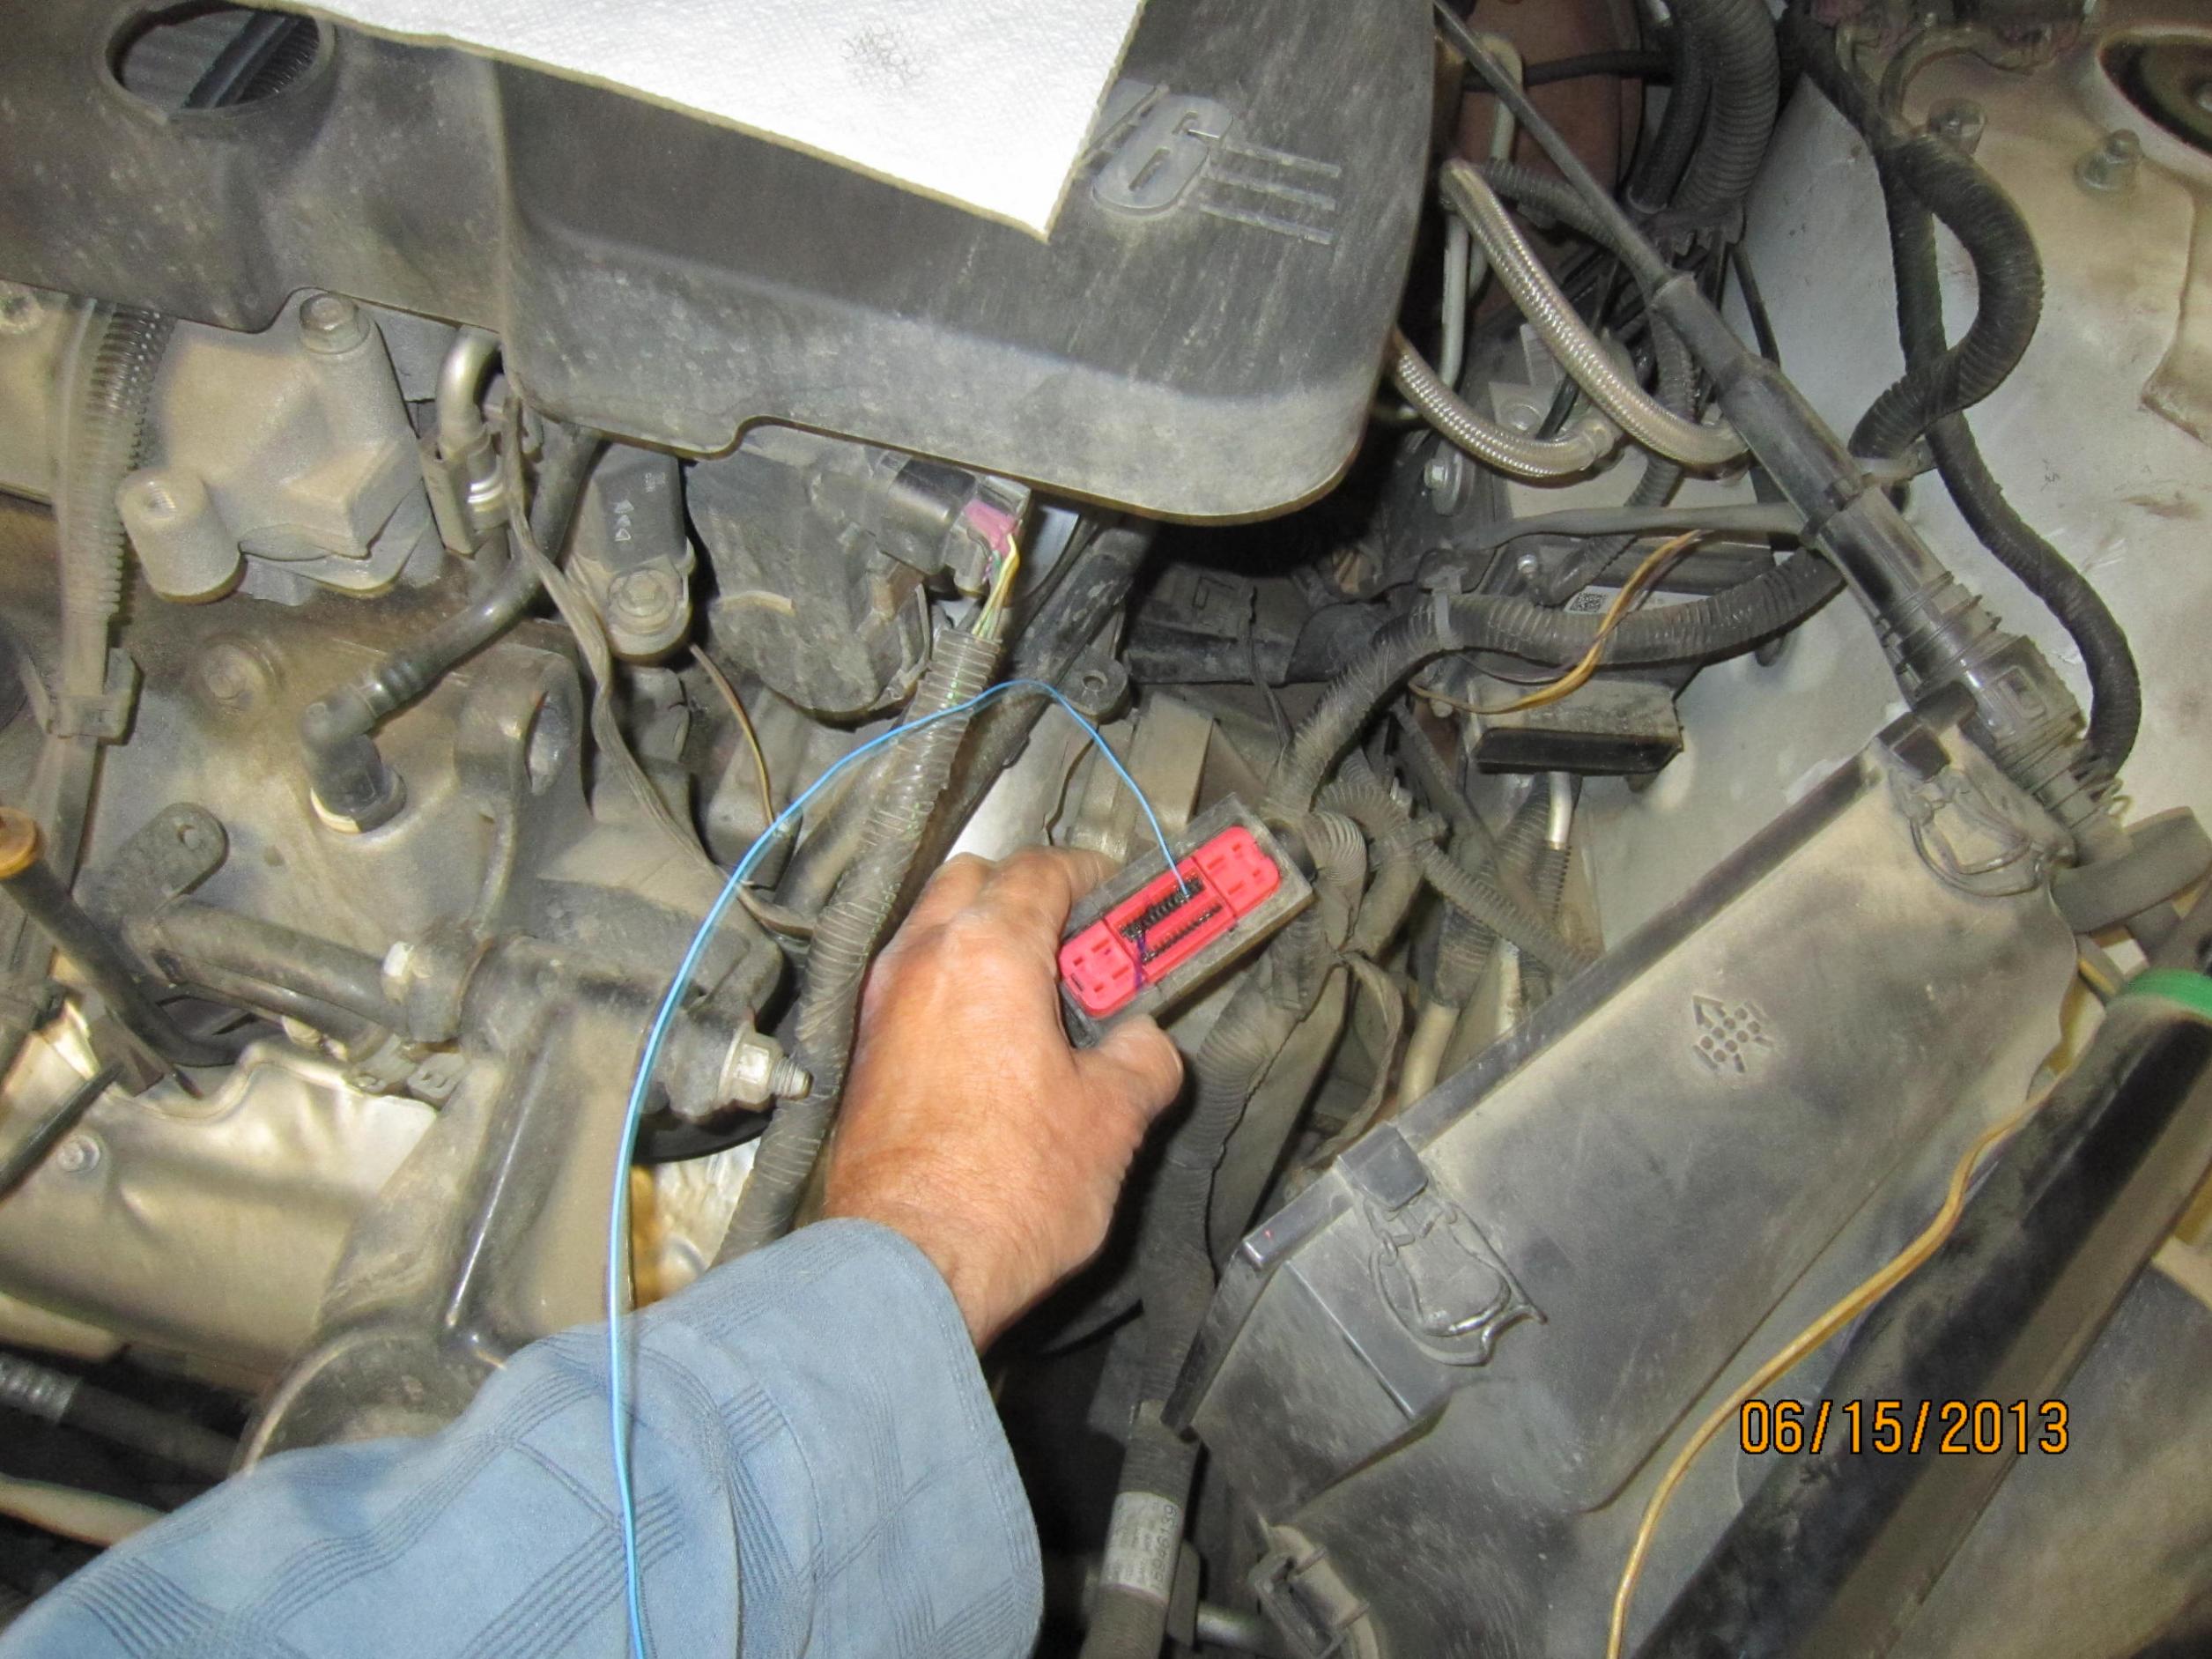 2008 Chevy Impala ABS Problems and fix - Chevrolet Forum ... ford explorer trailer wiring harness 